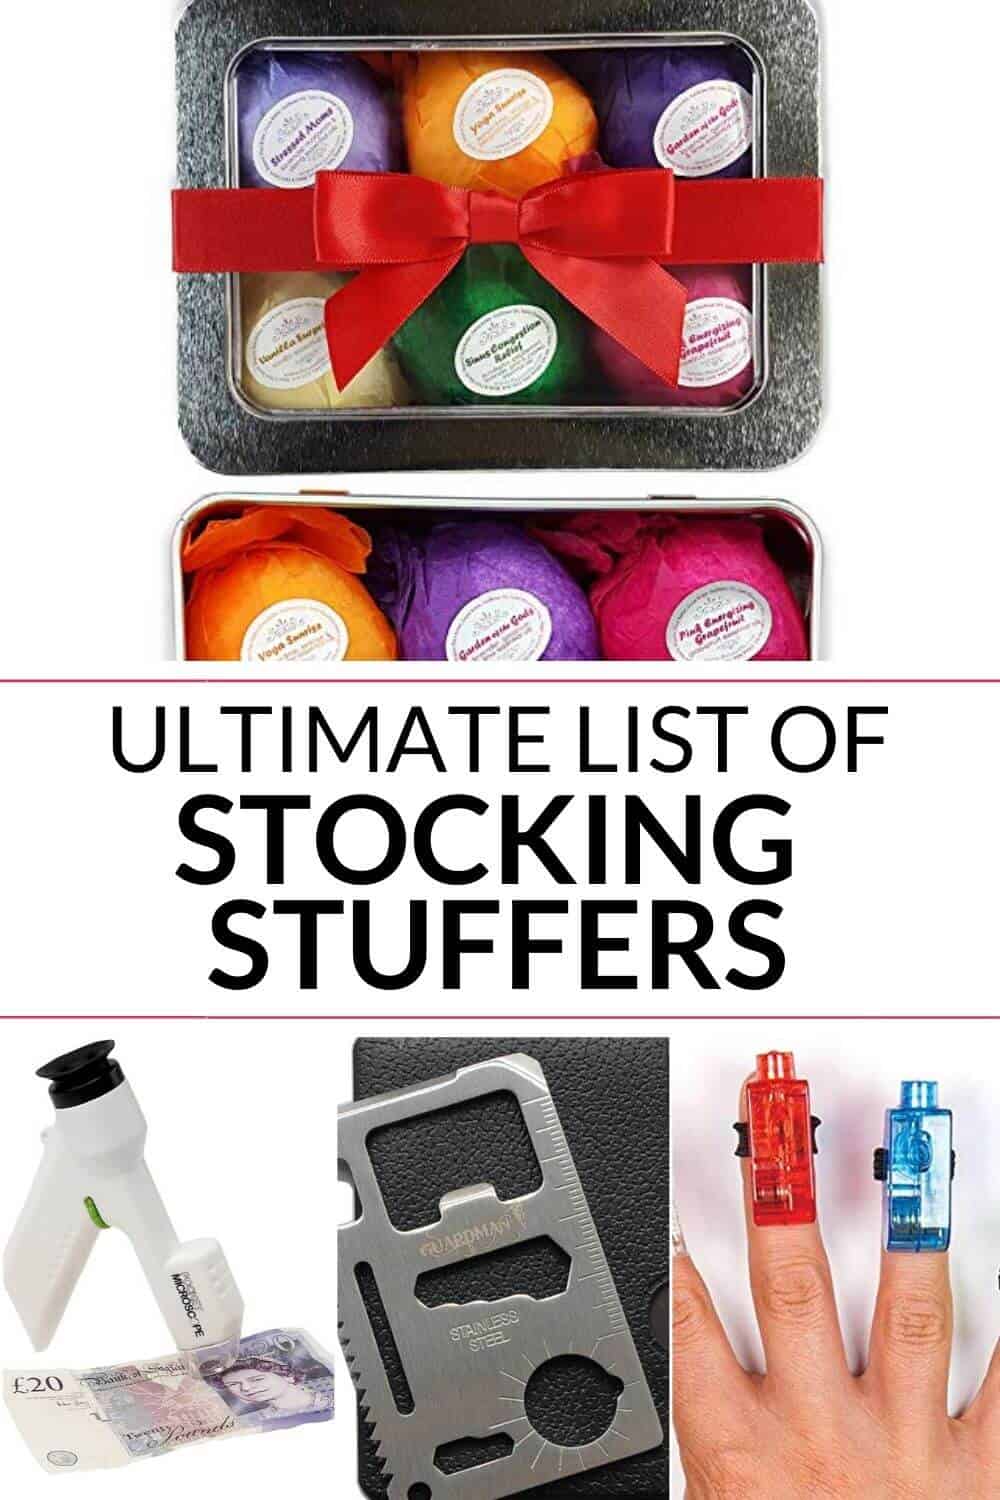 Collection of stocking stuffer ideas